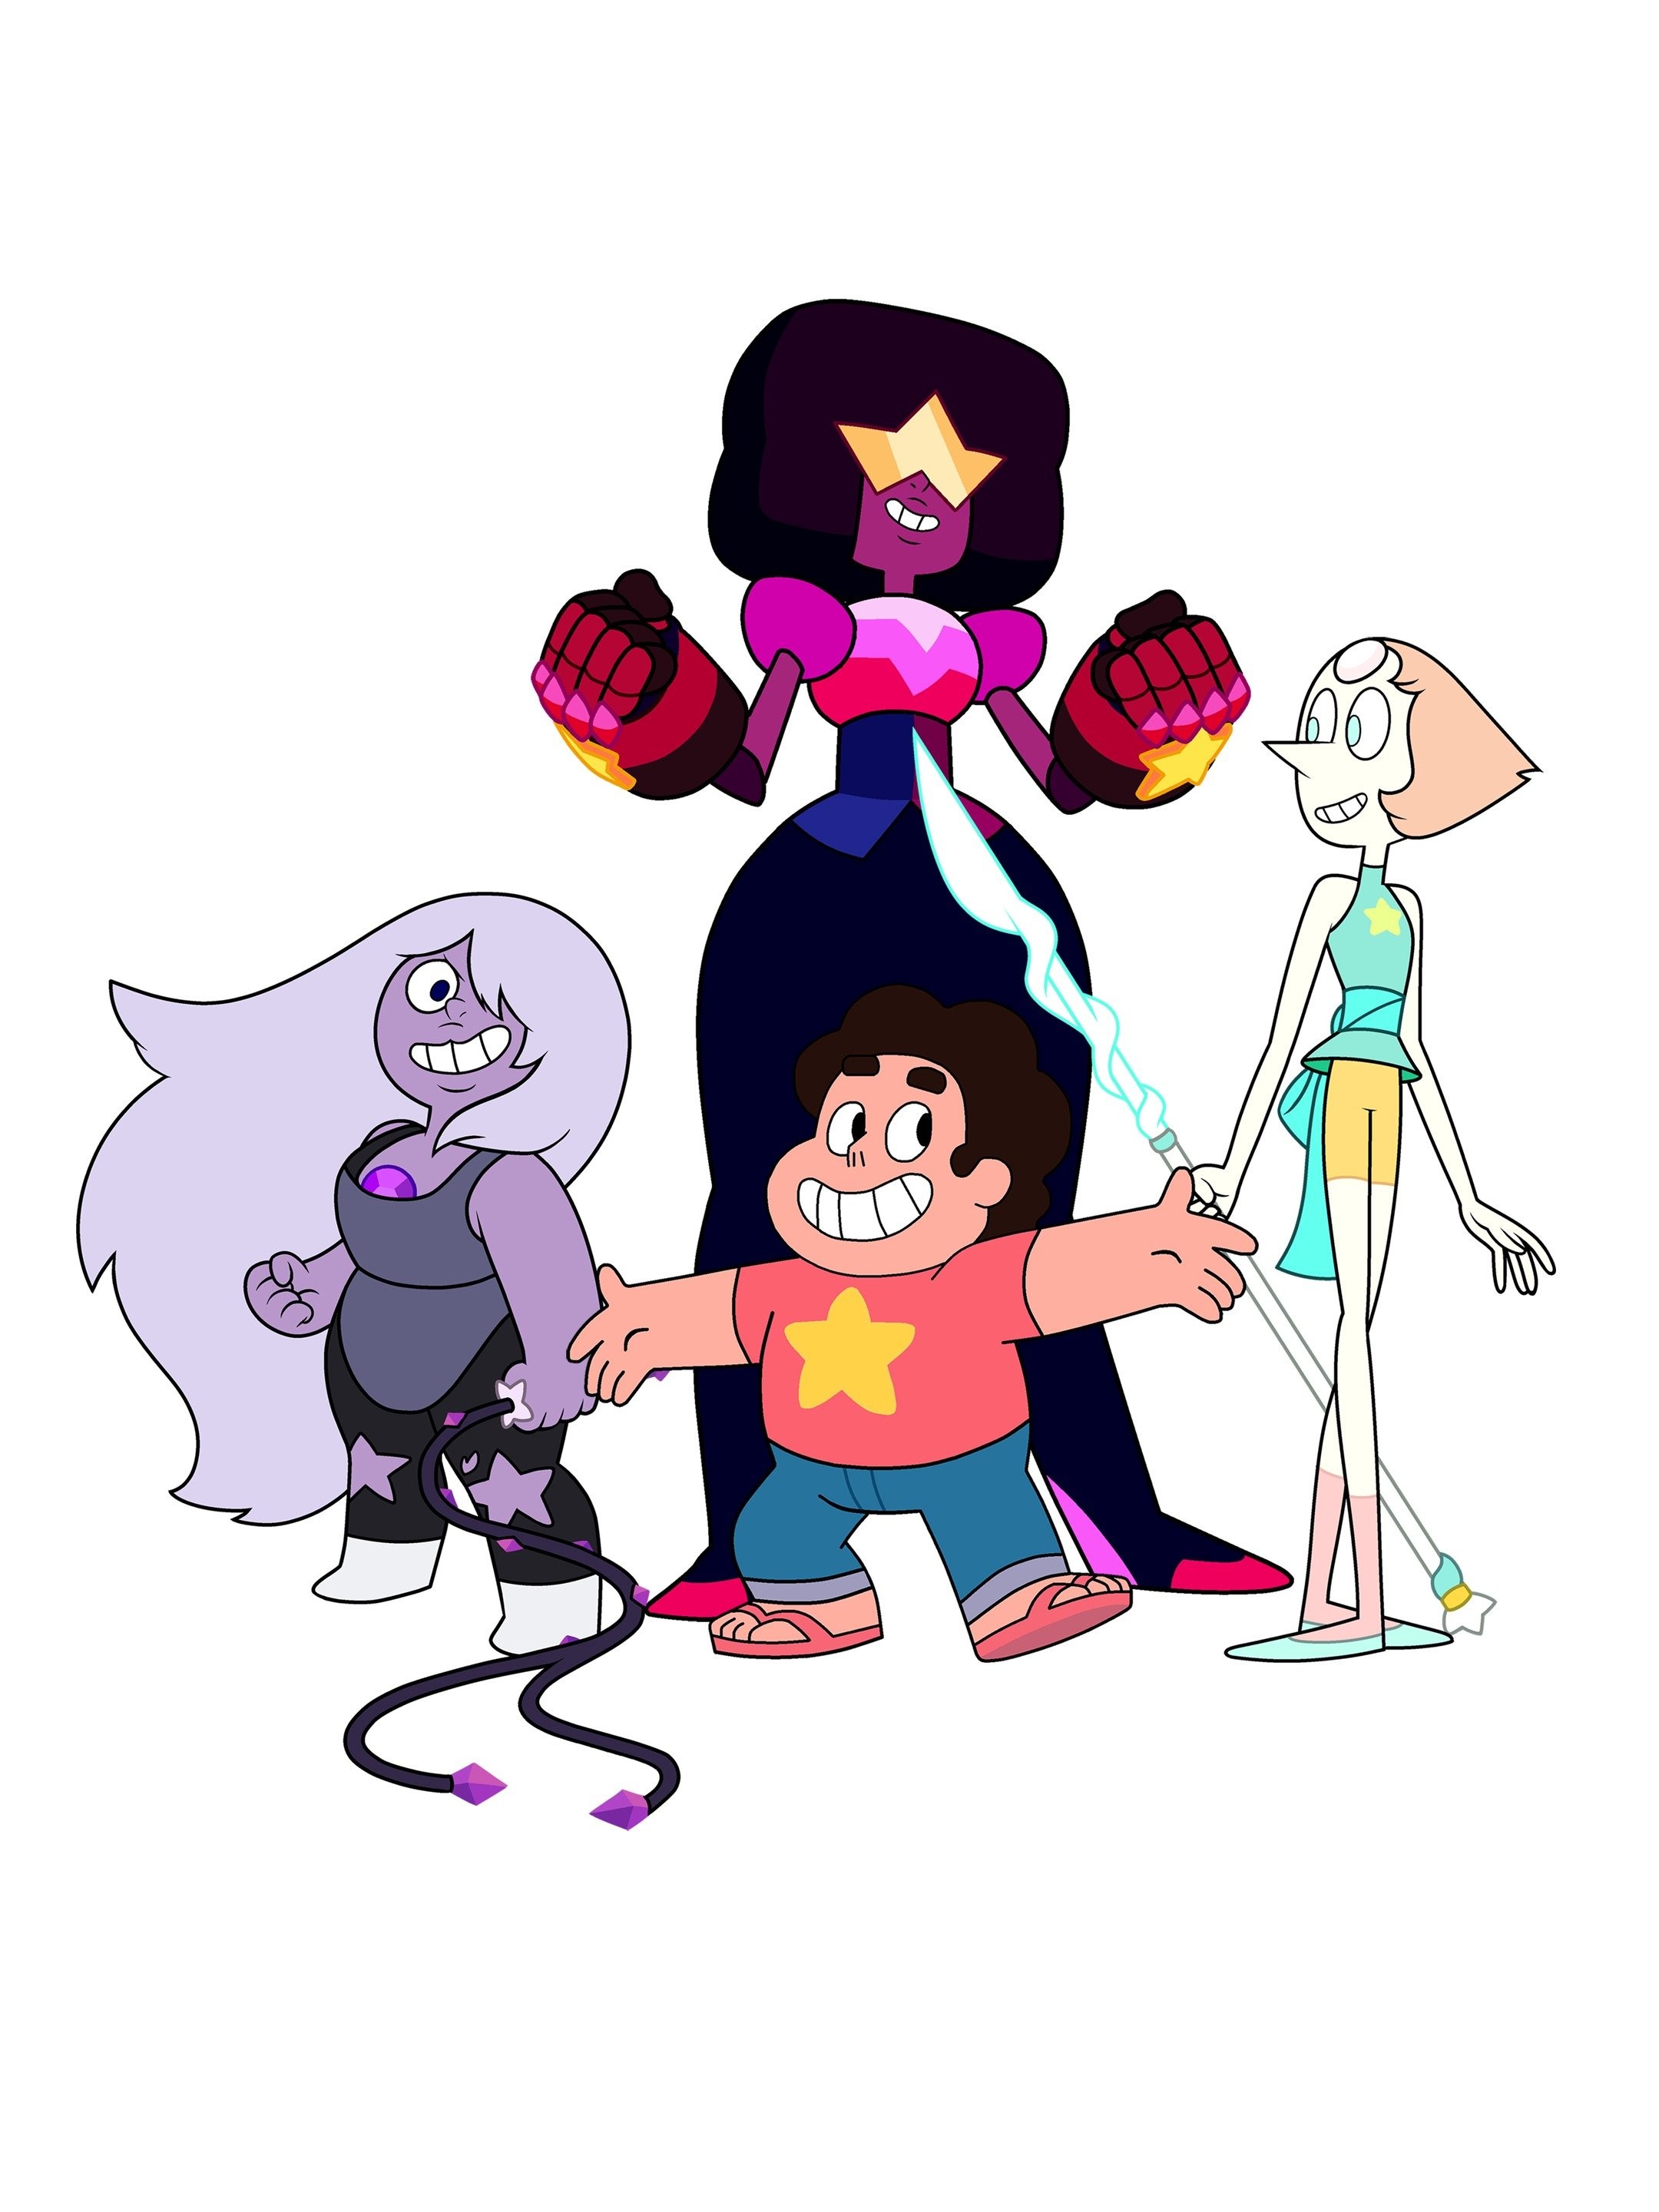 Moving on from past relationships, Steven Universe